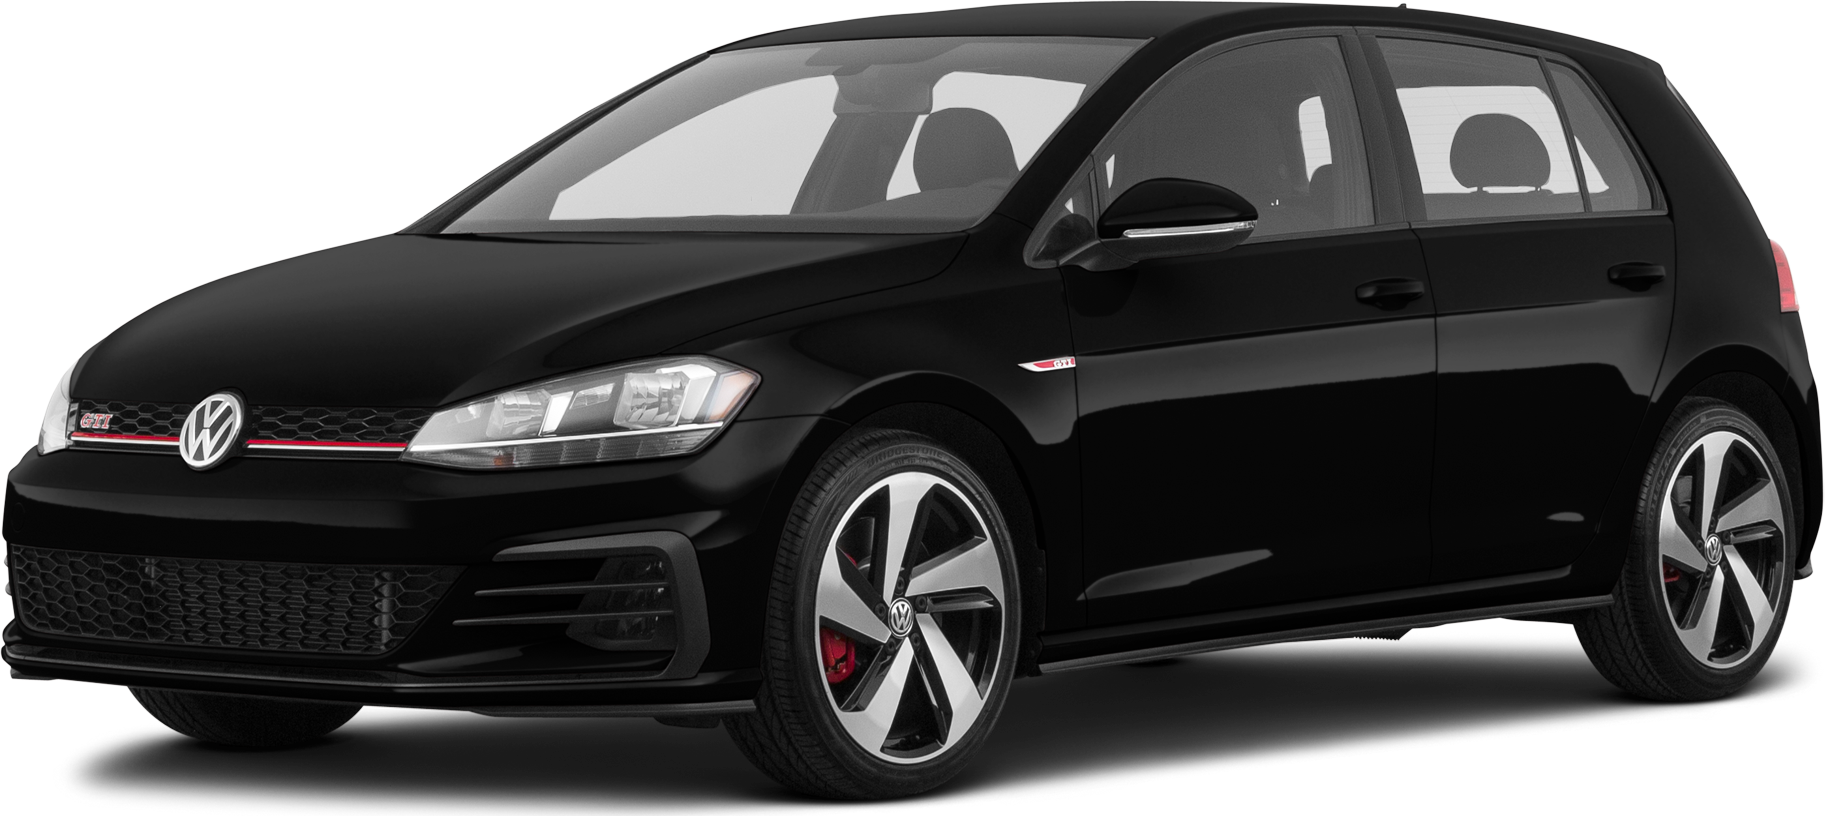 2020 Volkswagen Golf GTI Review, Pricing, and Specs